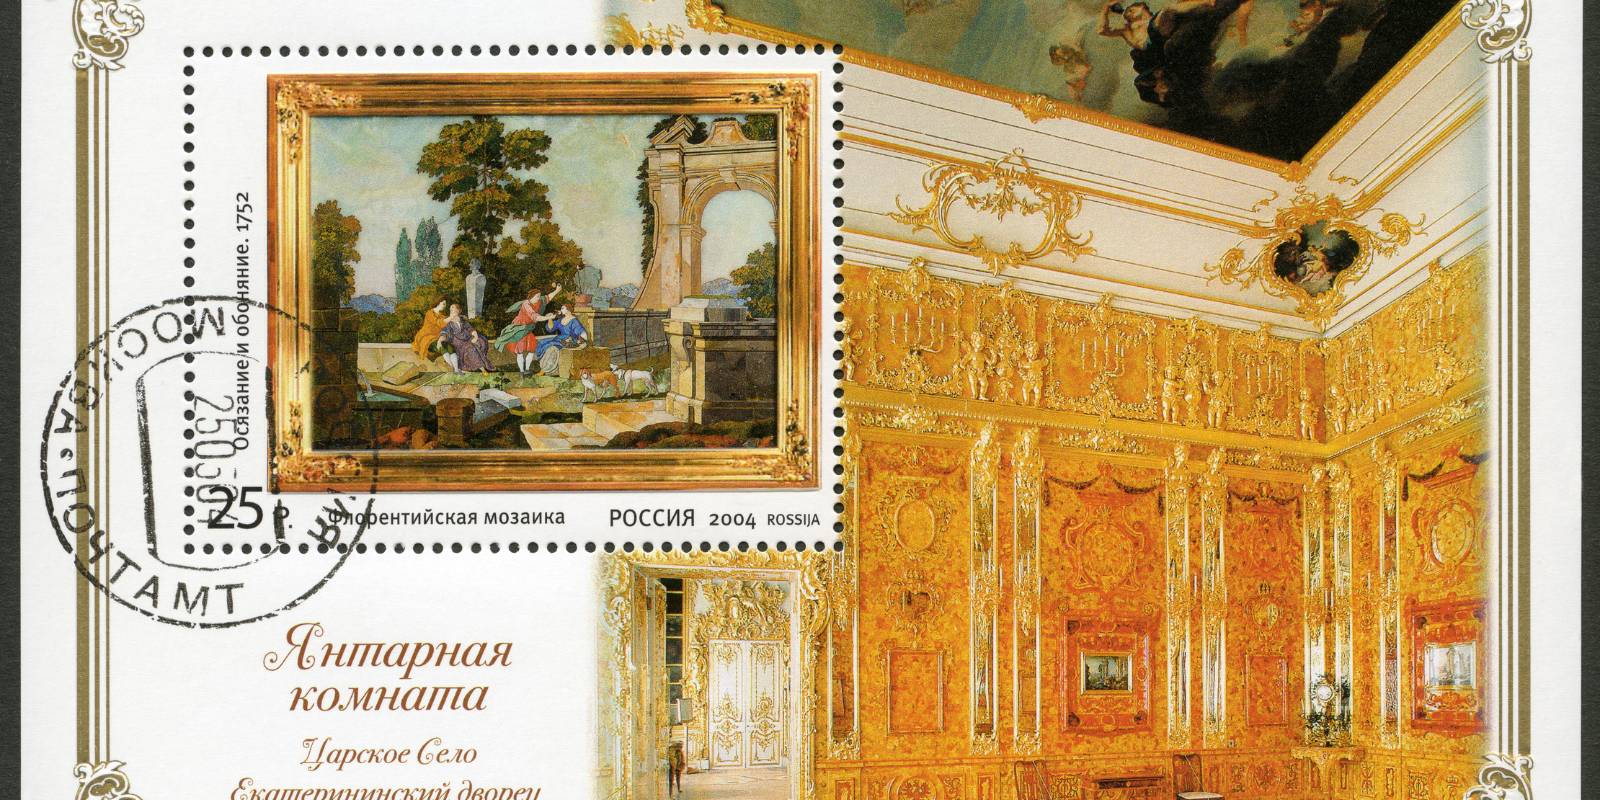 September 23rd: The Treasure Of The Amber Room Seized